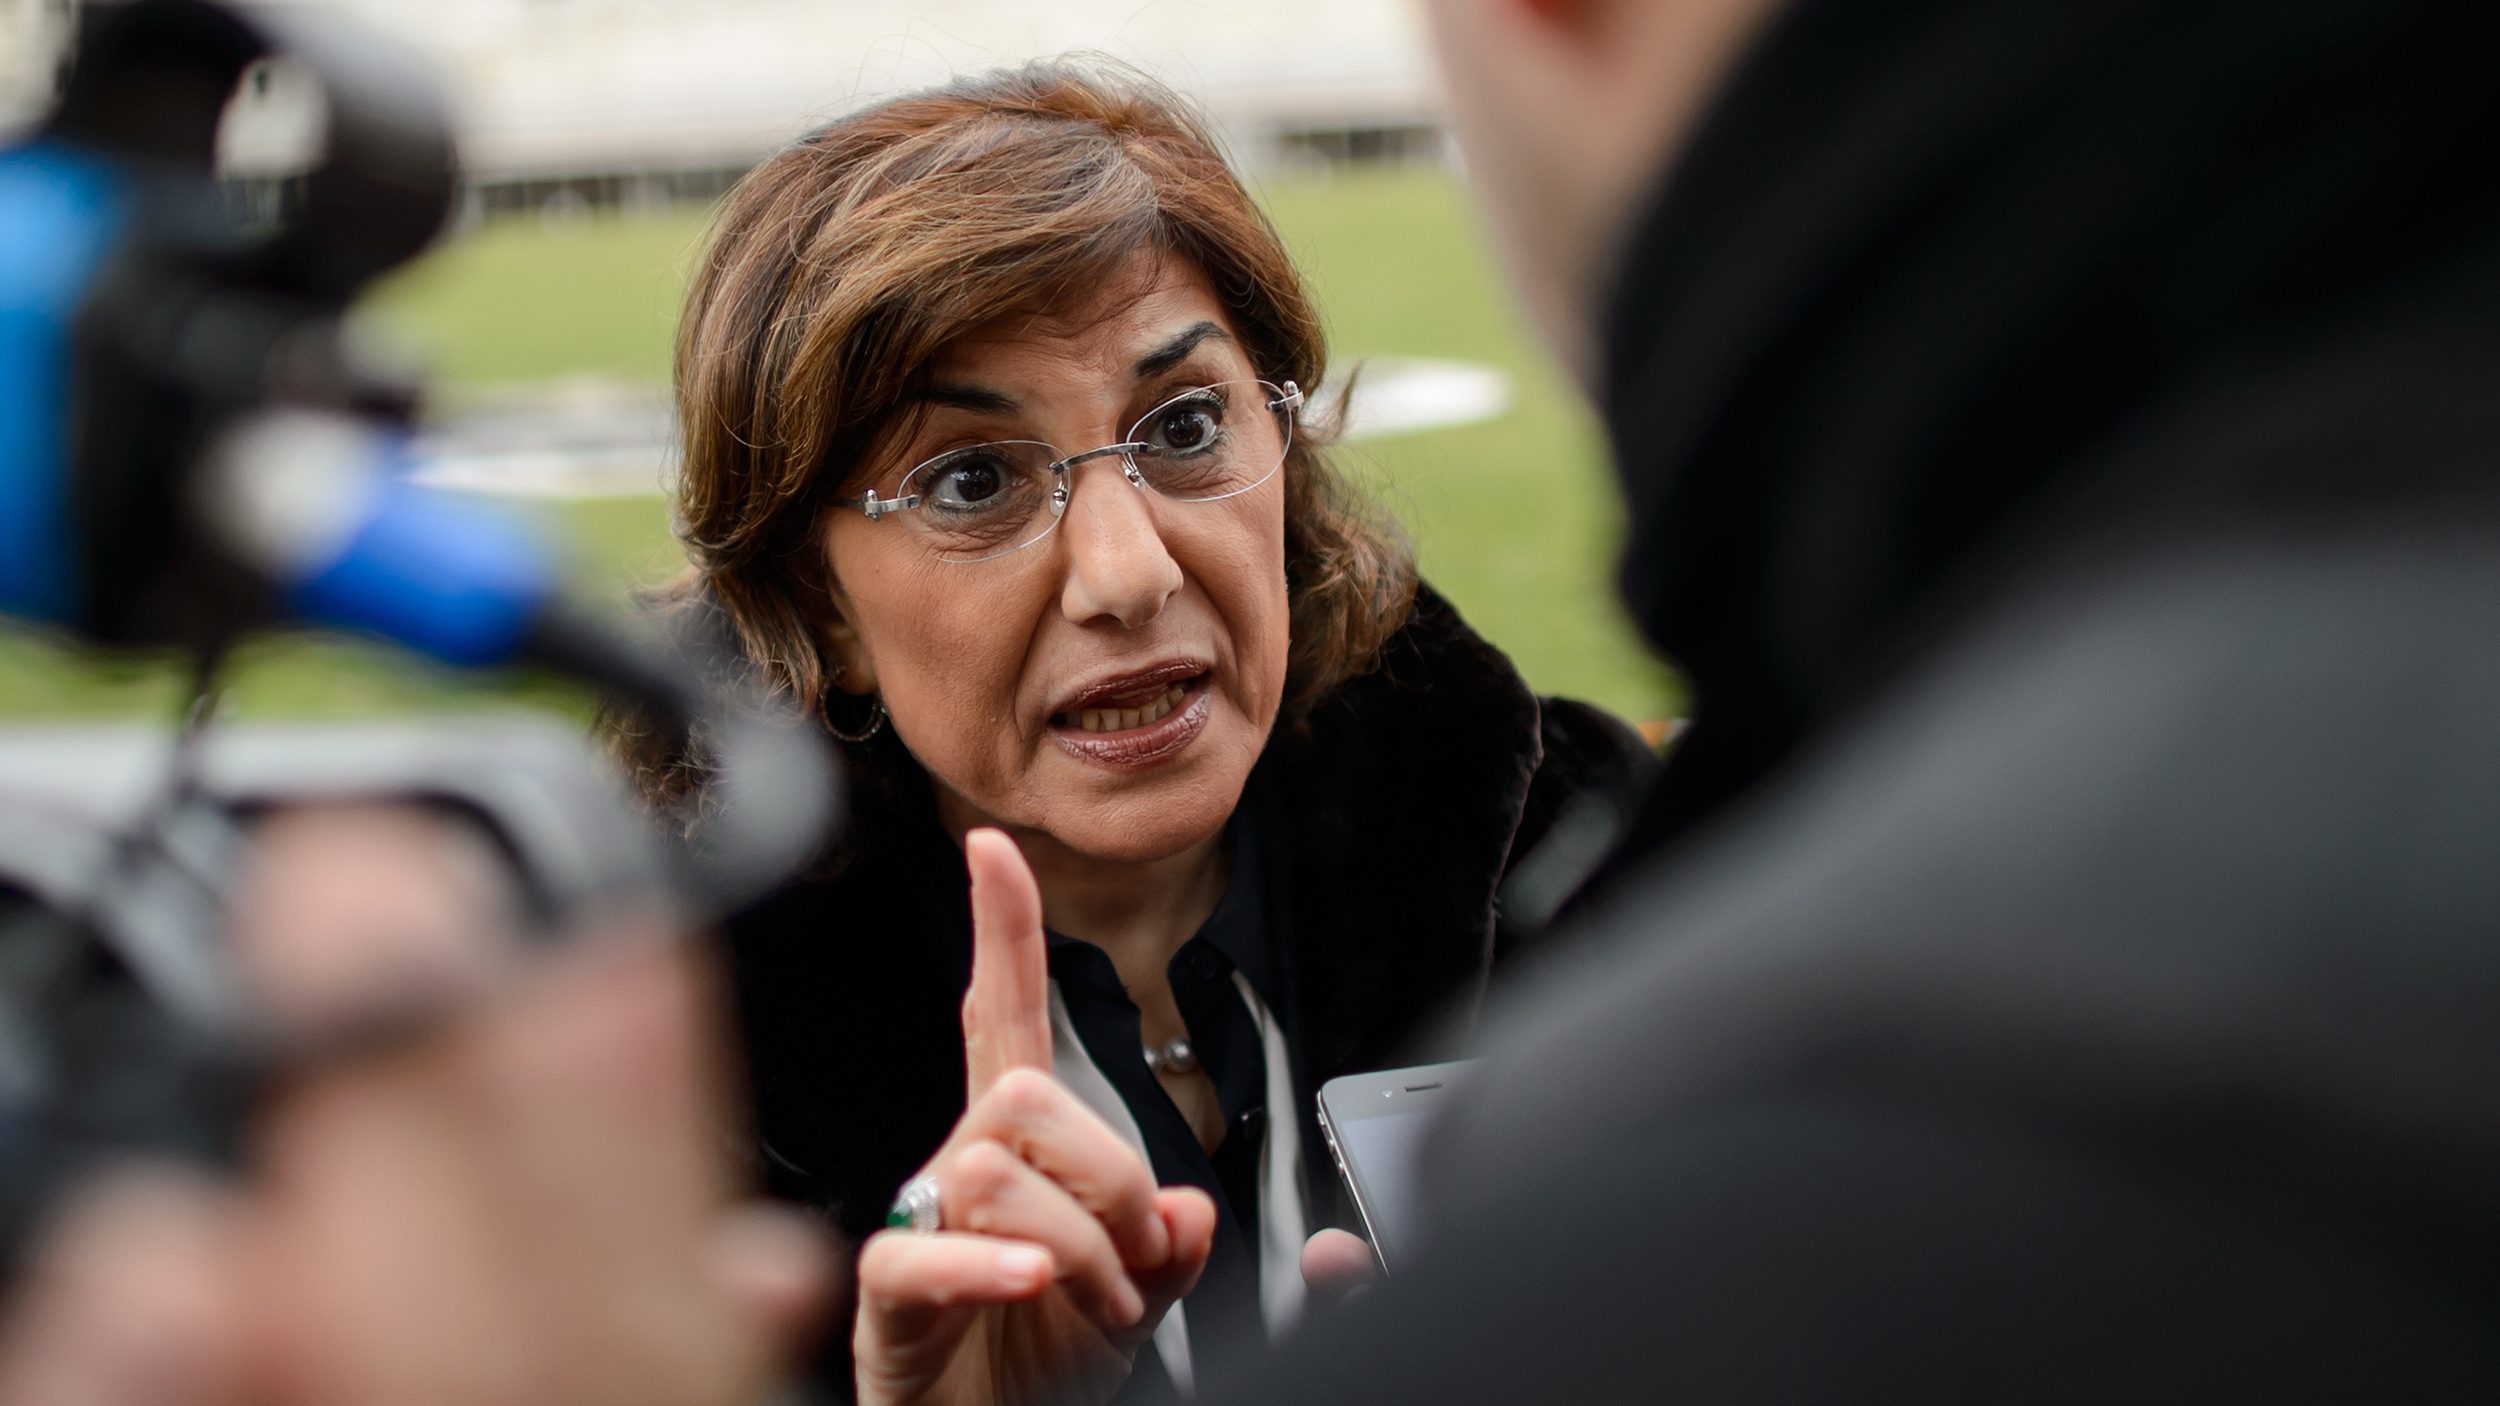 Buthaina Shaaban called the U.S. presence in Syria an occupation that must be resisted. AFP PHOTO / FABRICE COFFRINI